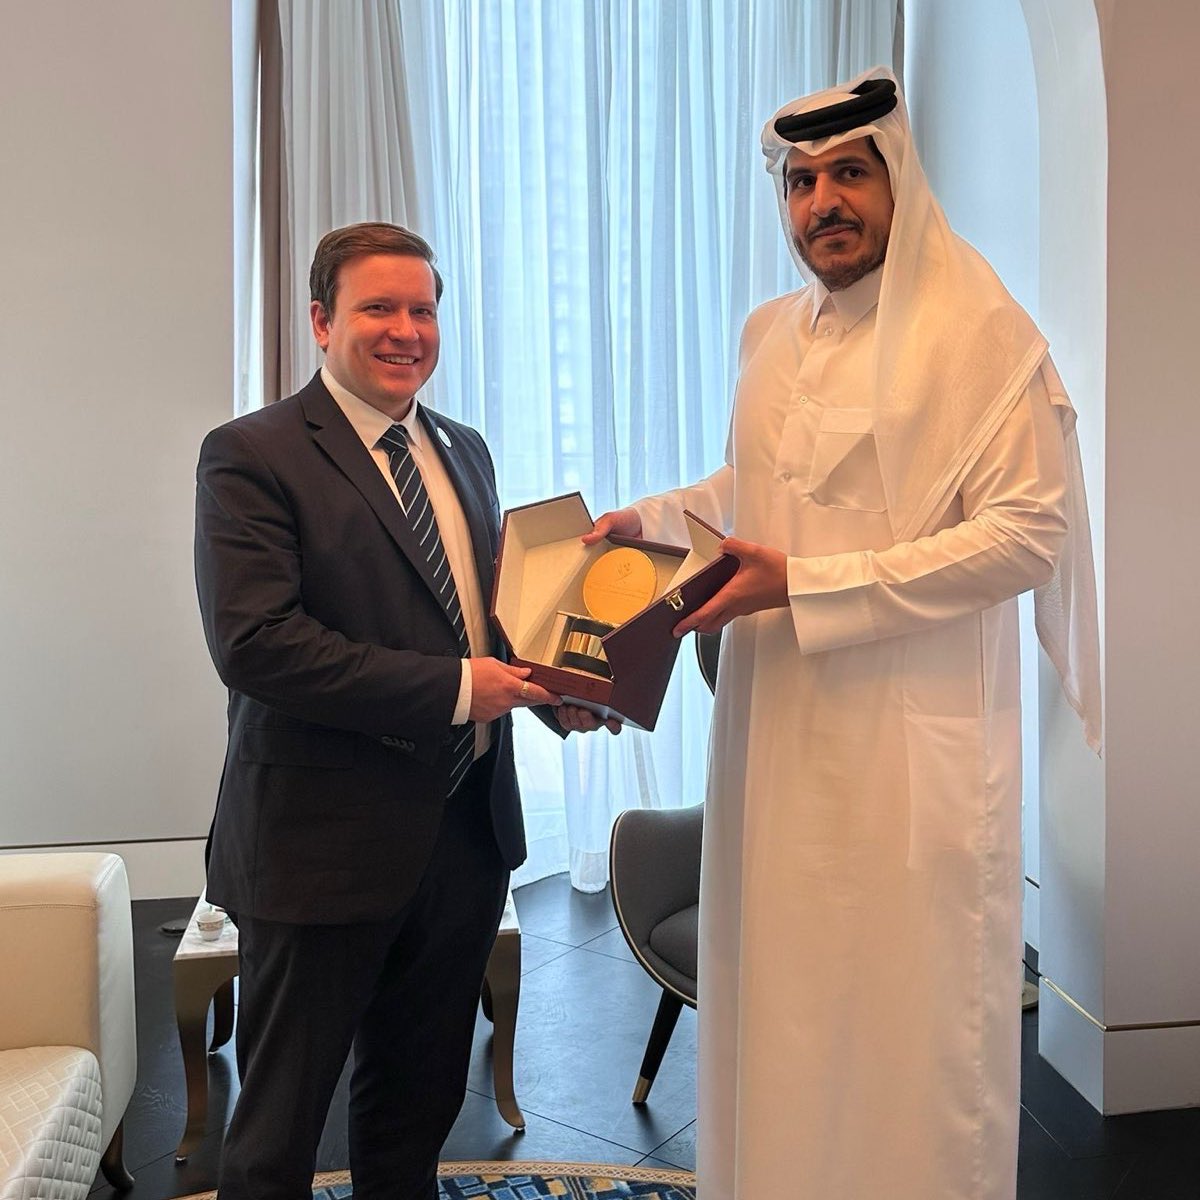 Excellent meeting between Minister @VilleTavio and Qatar’s Minister of Commerce today in Doha. This year Finland and Qatar celebrate 50 years of diplomatic relations. Great potential to expand trade and investments between our countries. 🇫🇮🇶🇦